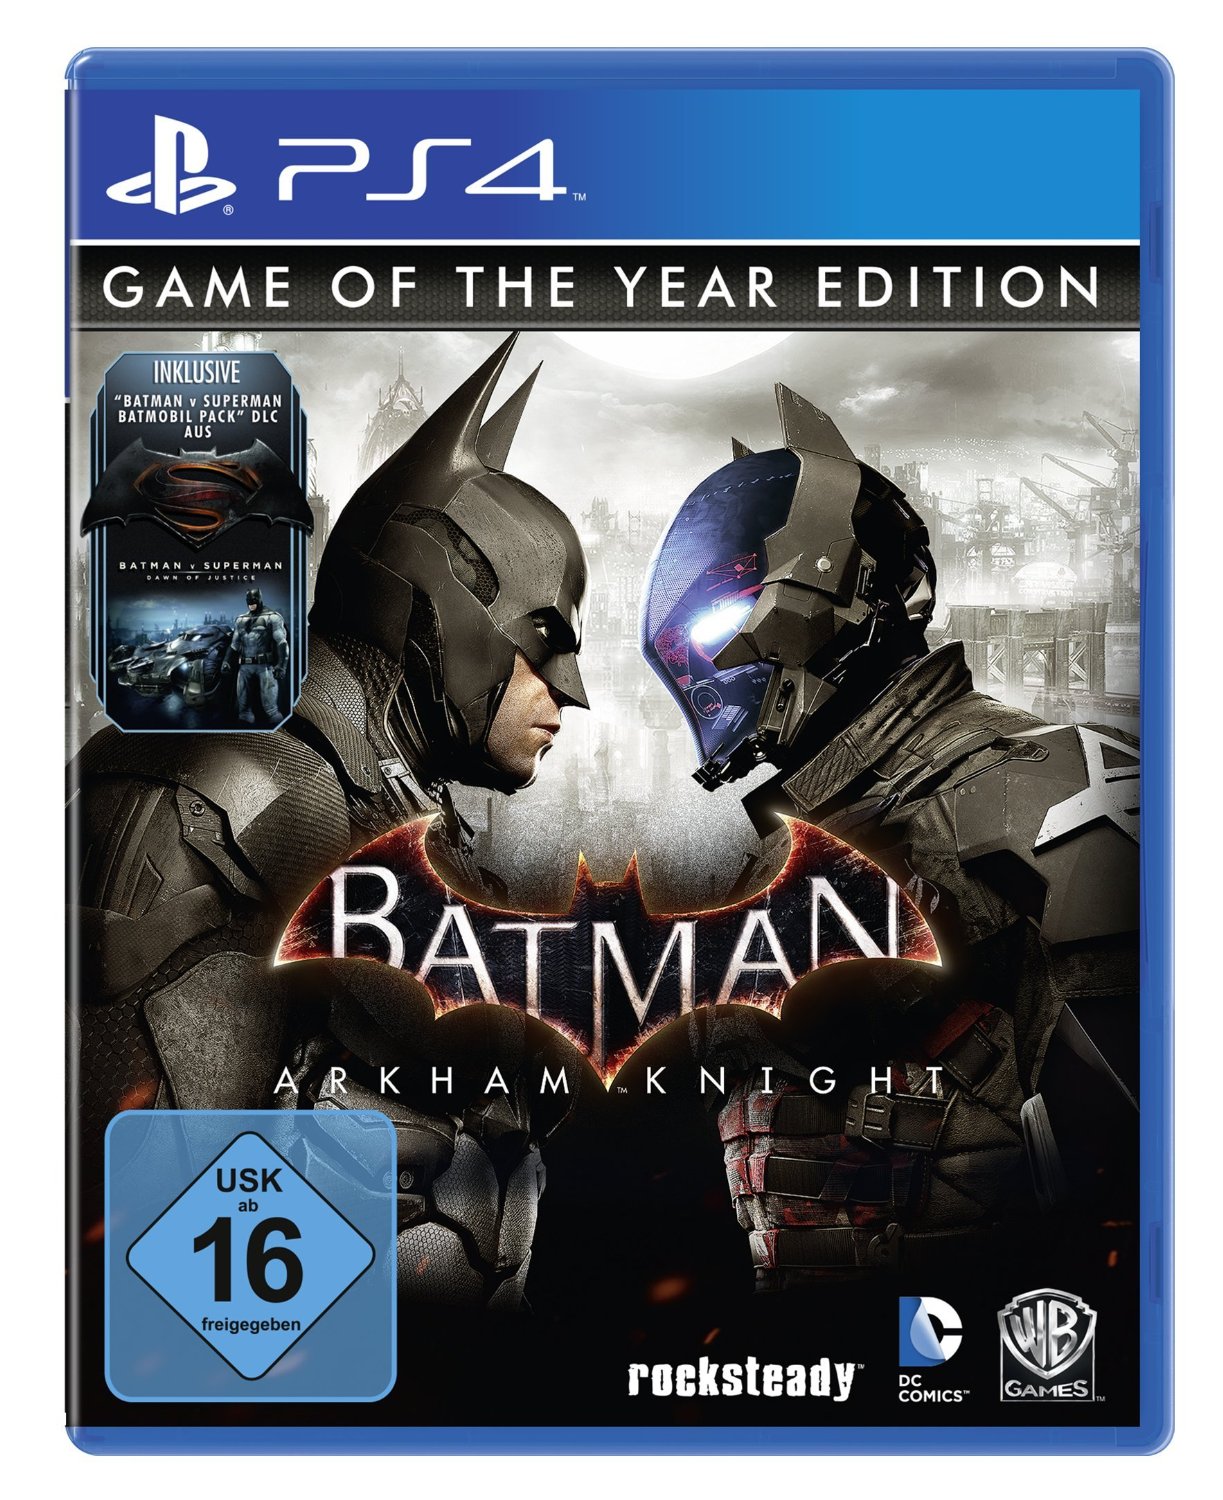 Batman Arkham Knight Game of the Year Edition PS4, XB1 Listed